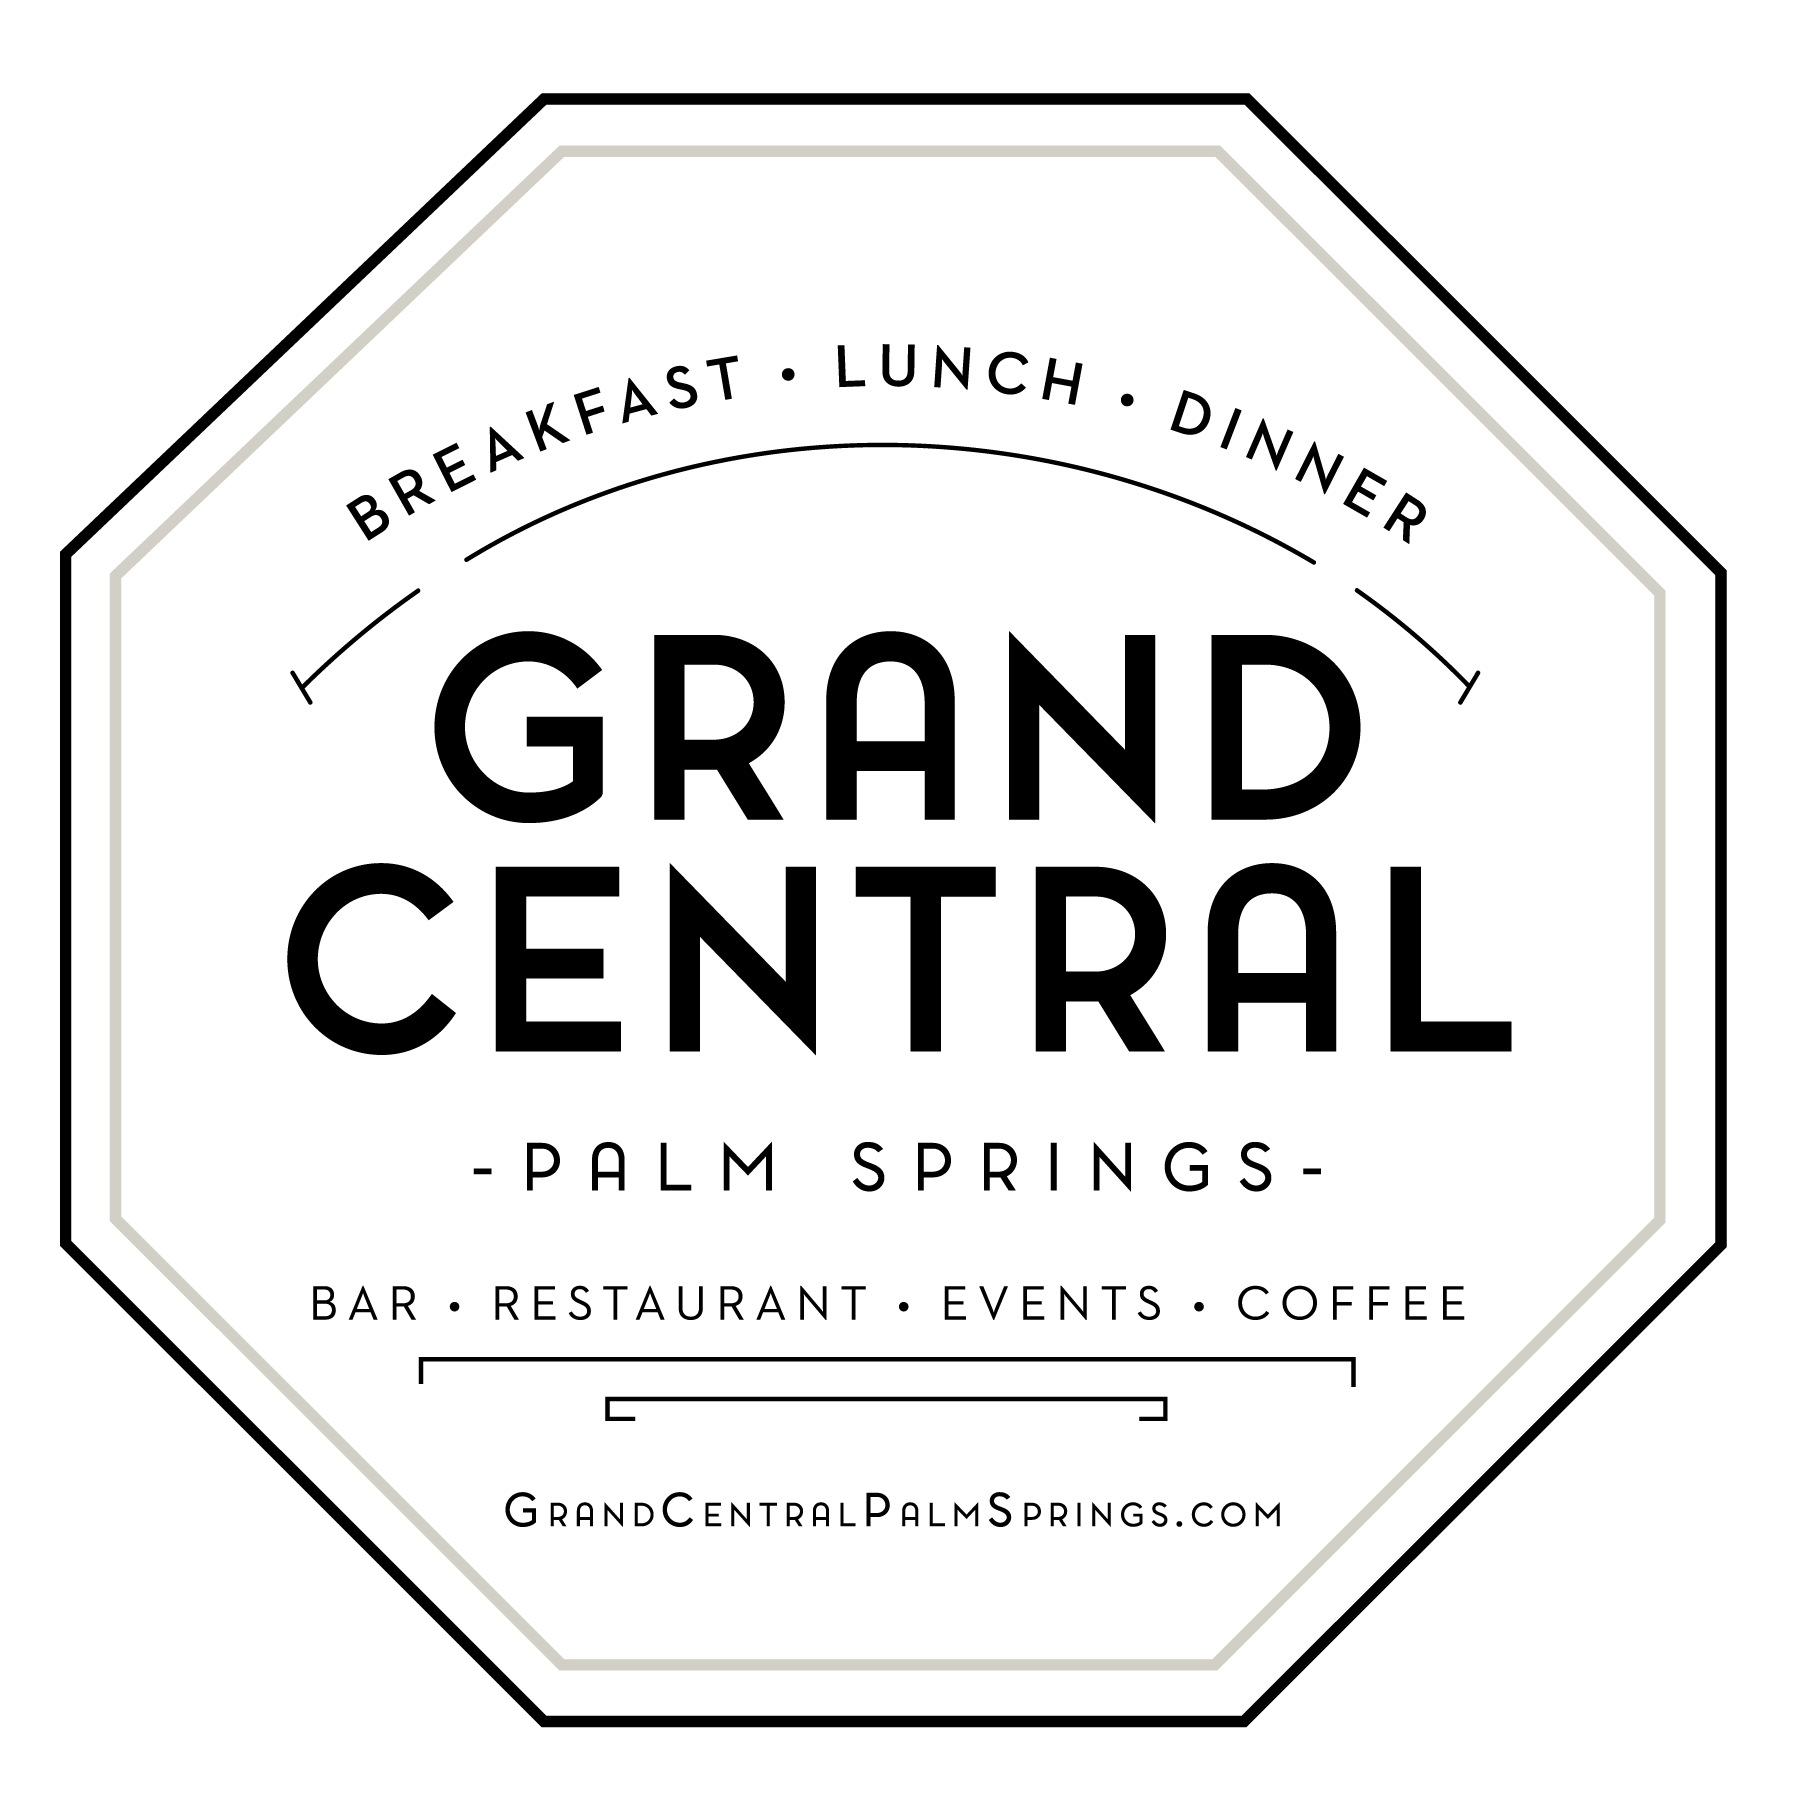 Grand Central Palm Springs